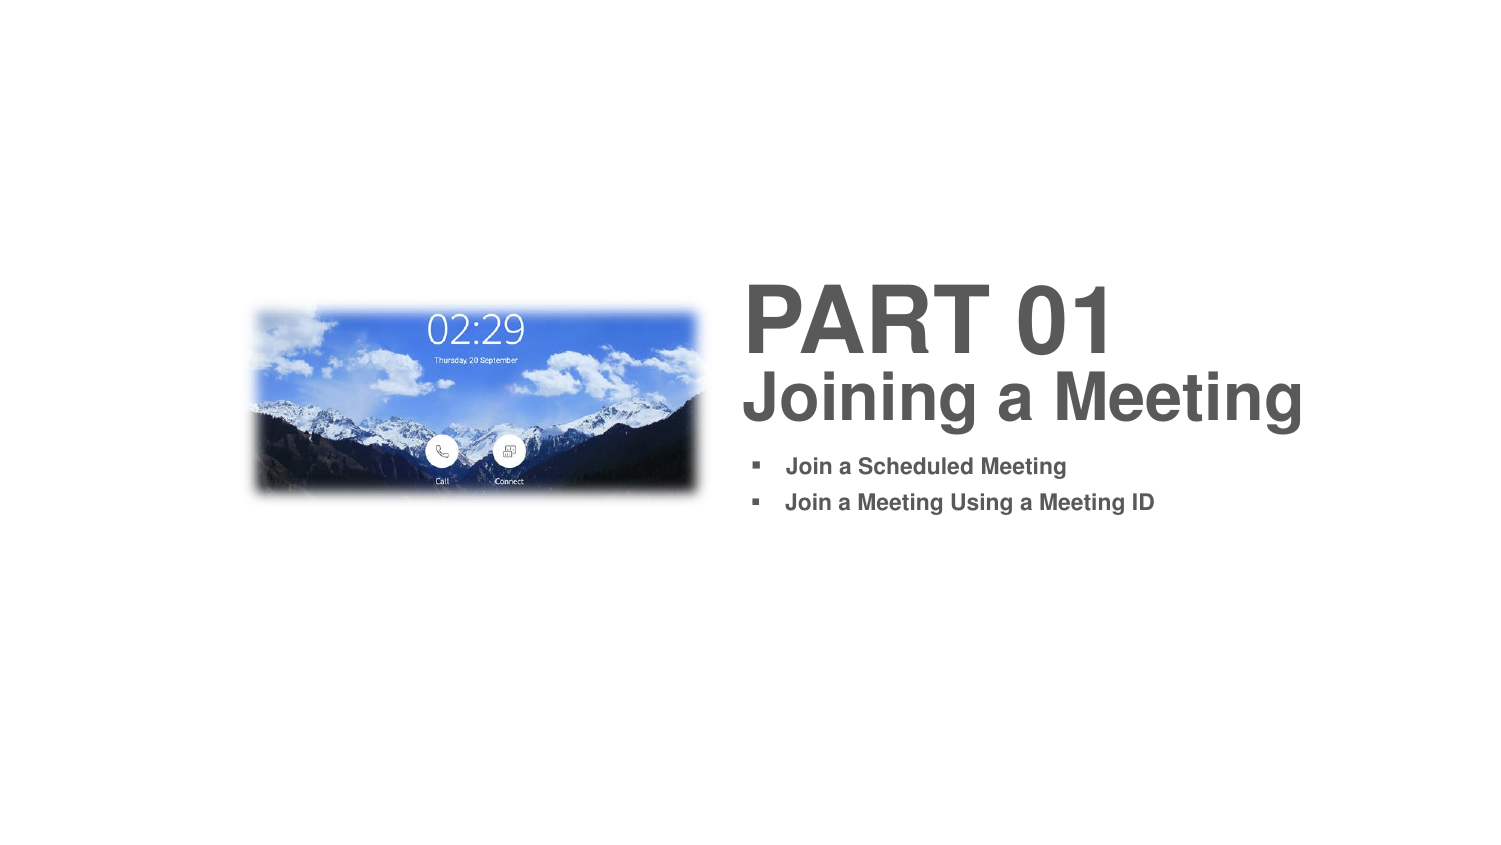 PART 01Join a Scheduled MeetingJoin a Meeting Using a Meeting IDJoining a Meeting